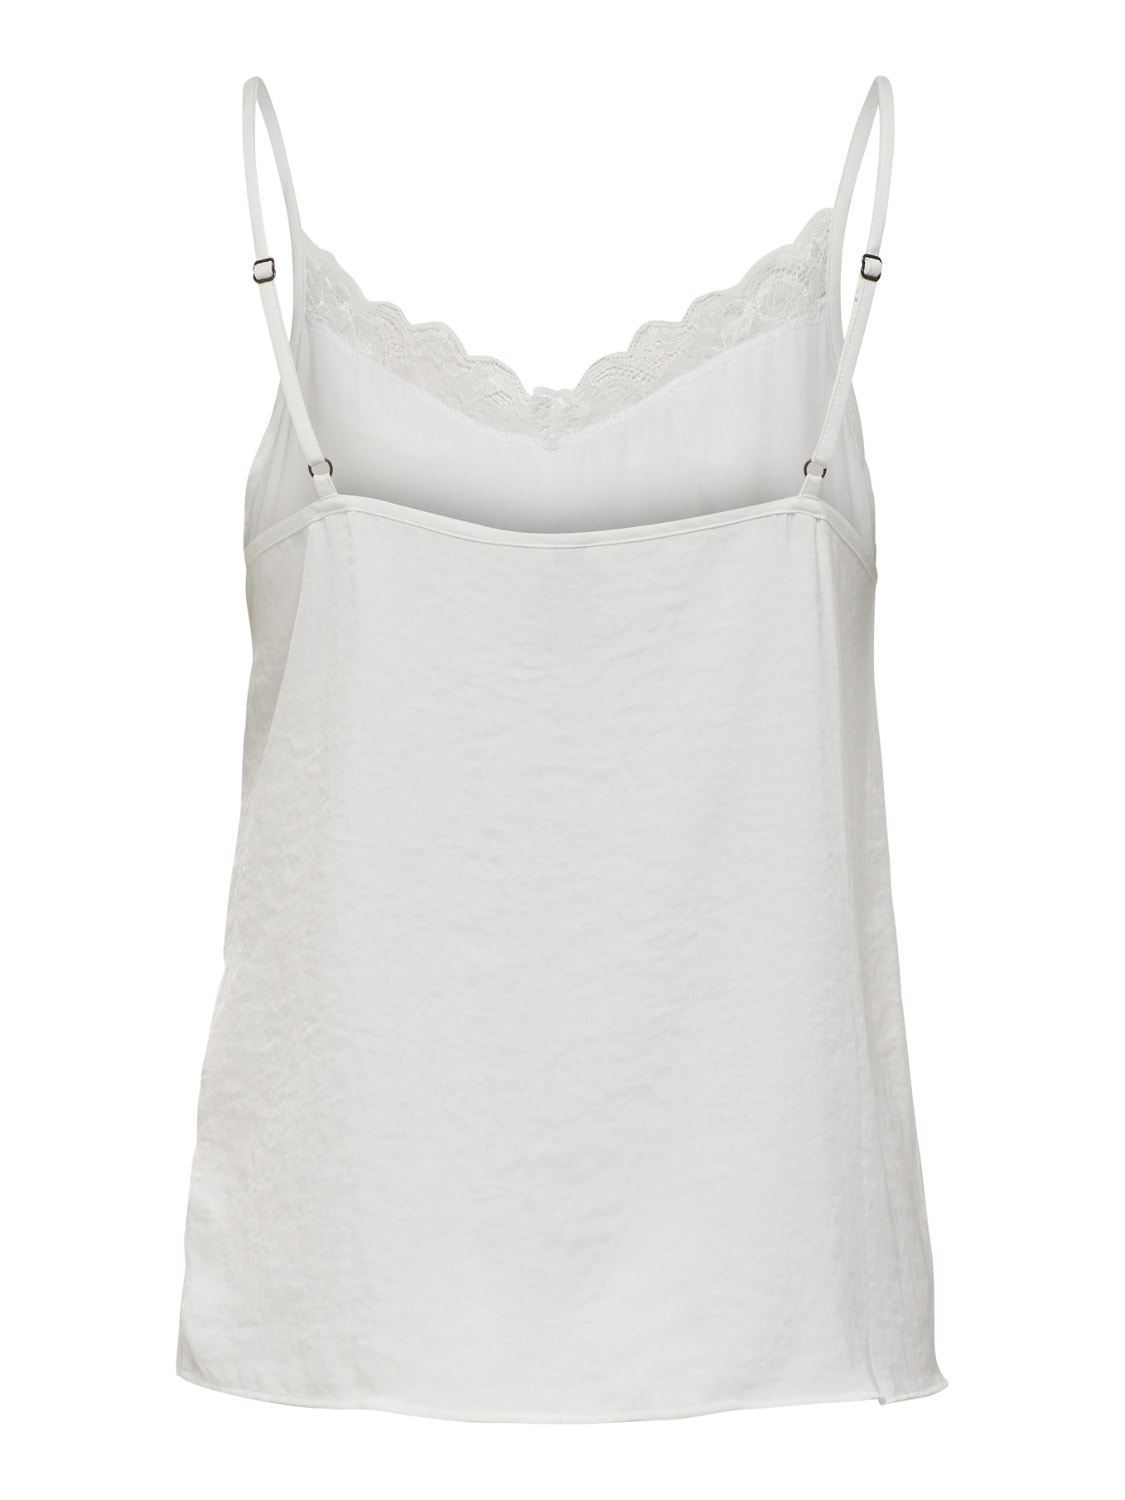 ONLY Lace Sleeveless Top -Cloud Dancer - 15233143